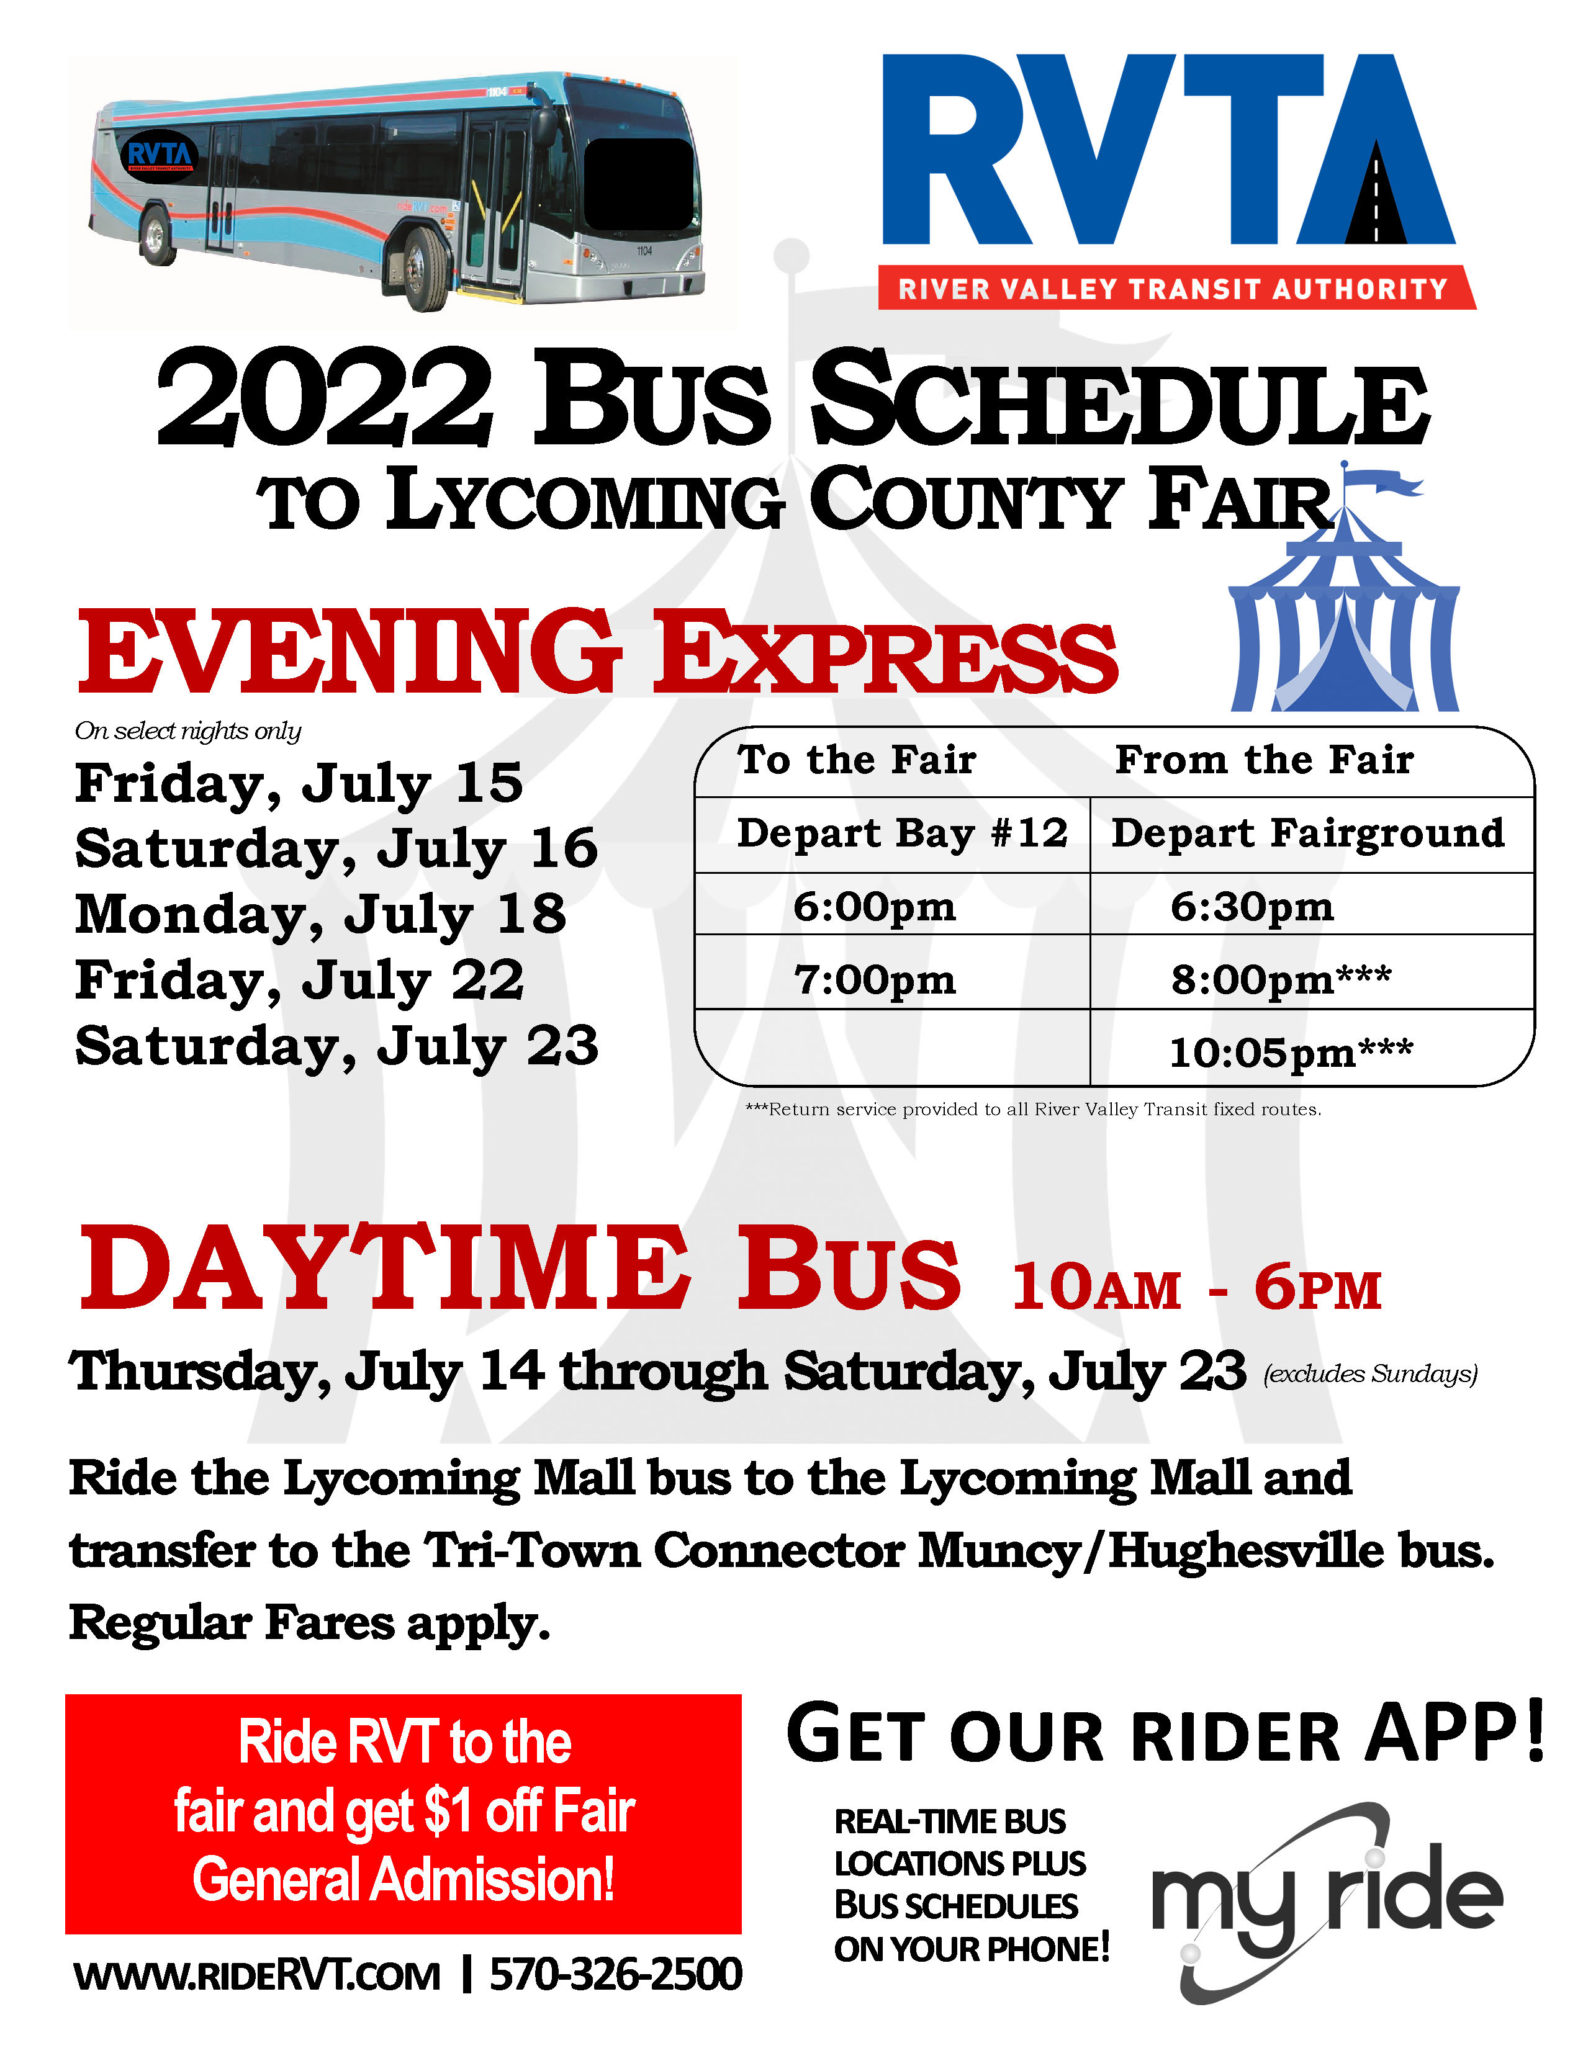 2022 RVTA Bus Schedule for 151st Lycoming County Fair – River Valley